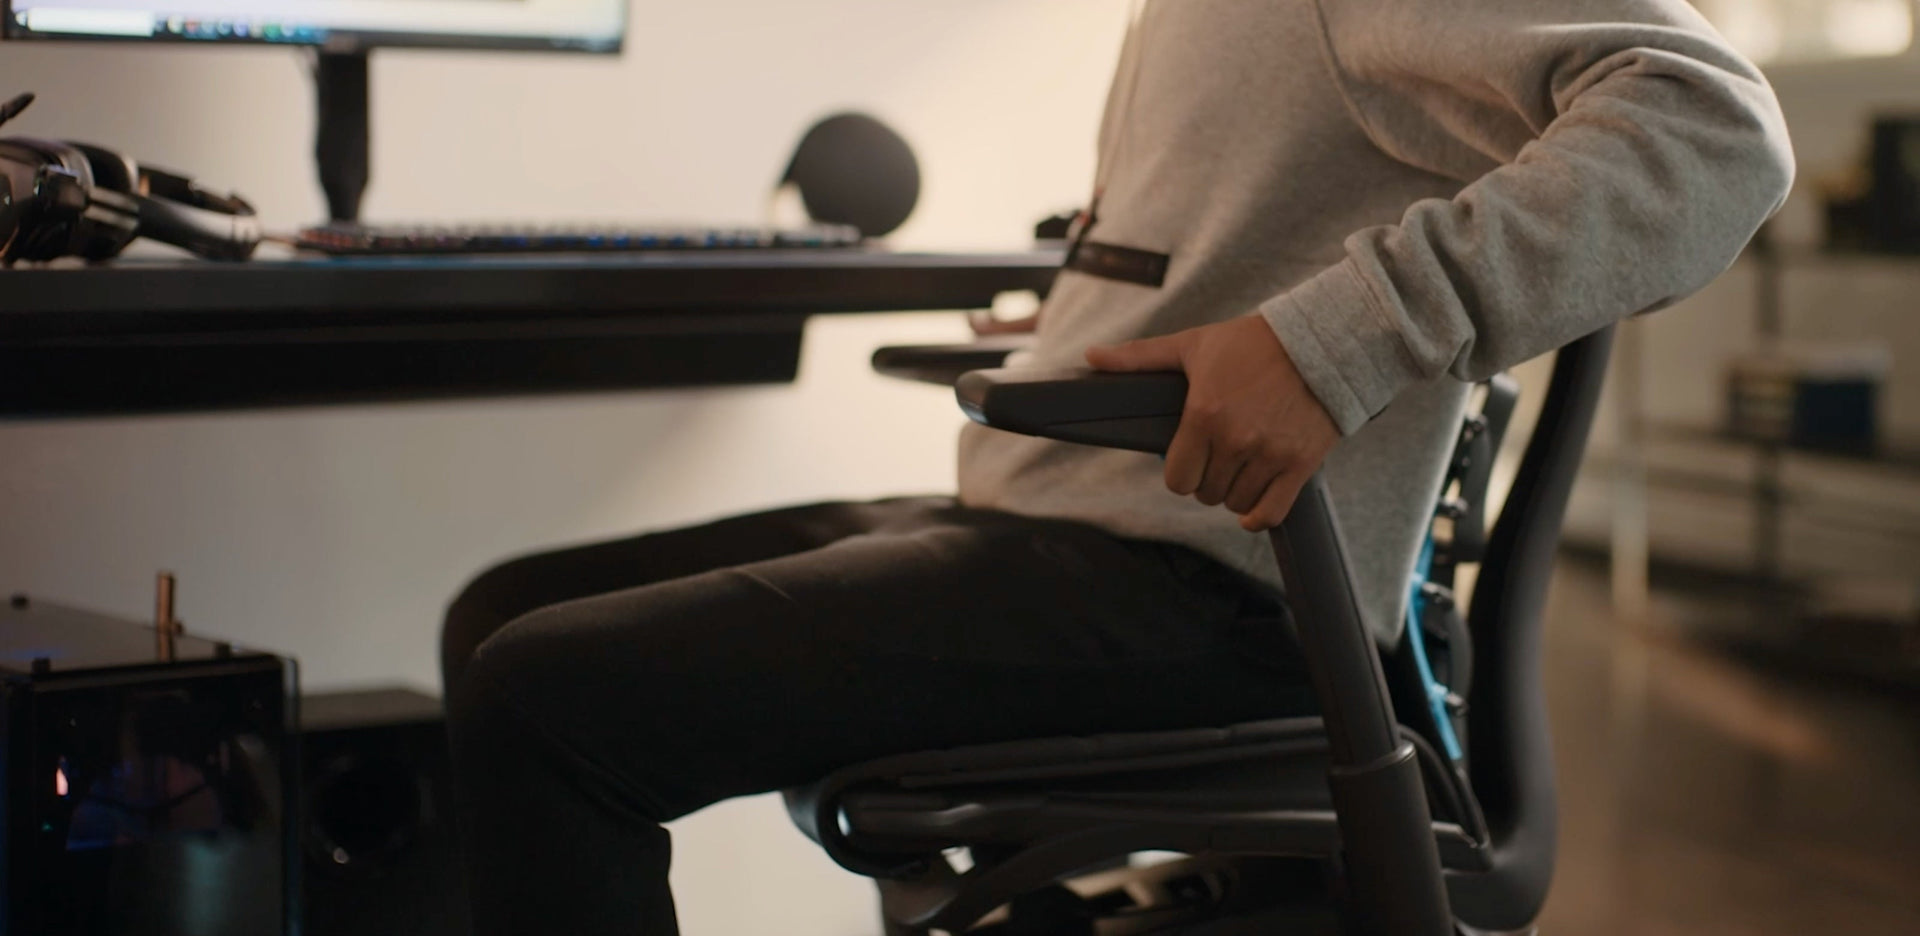 A close-up video of a black Embody Gaming Chair arm being adjusted by a person in front of a desk.